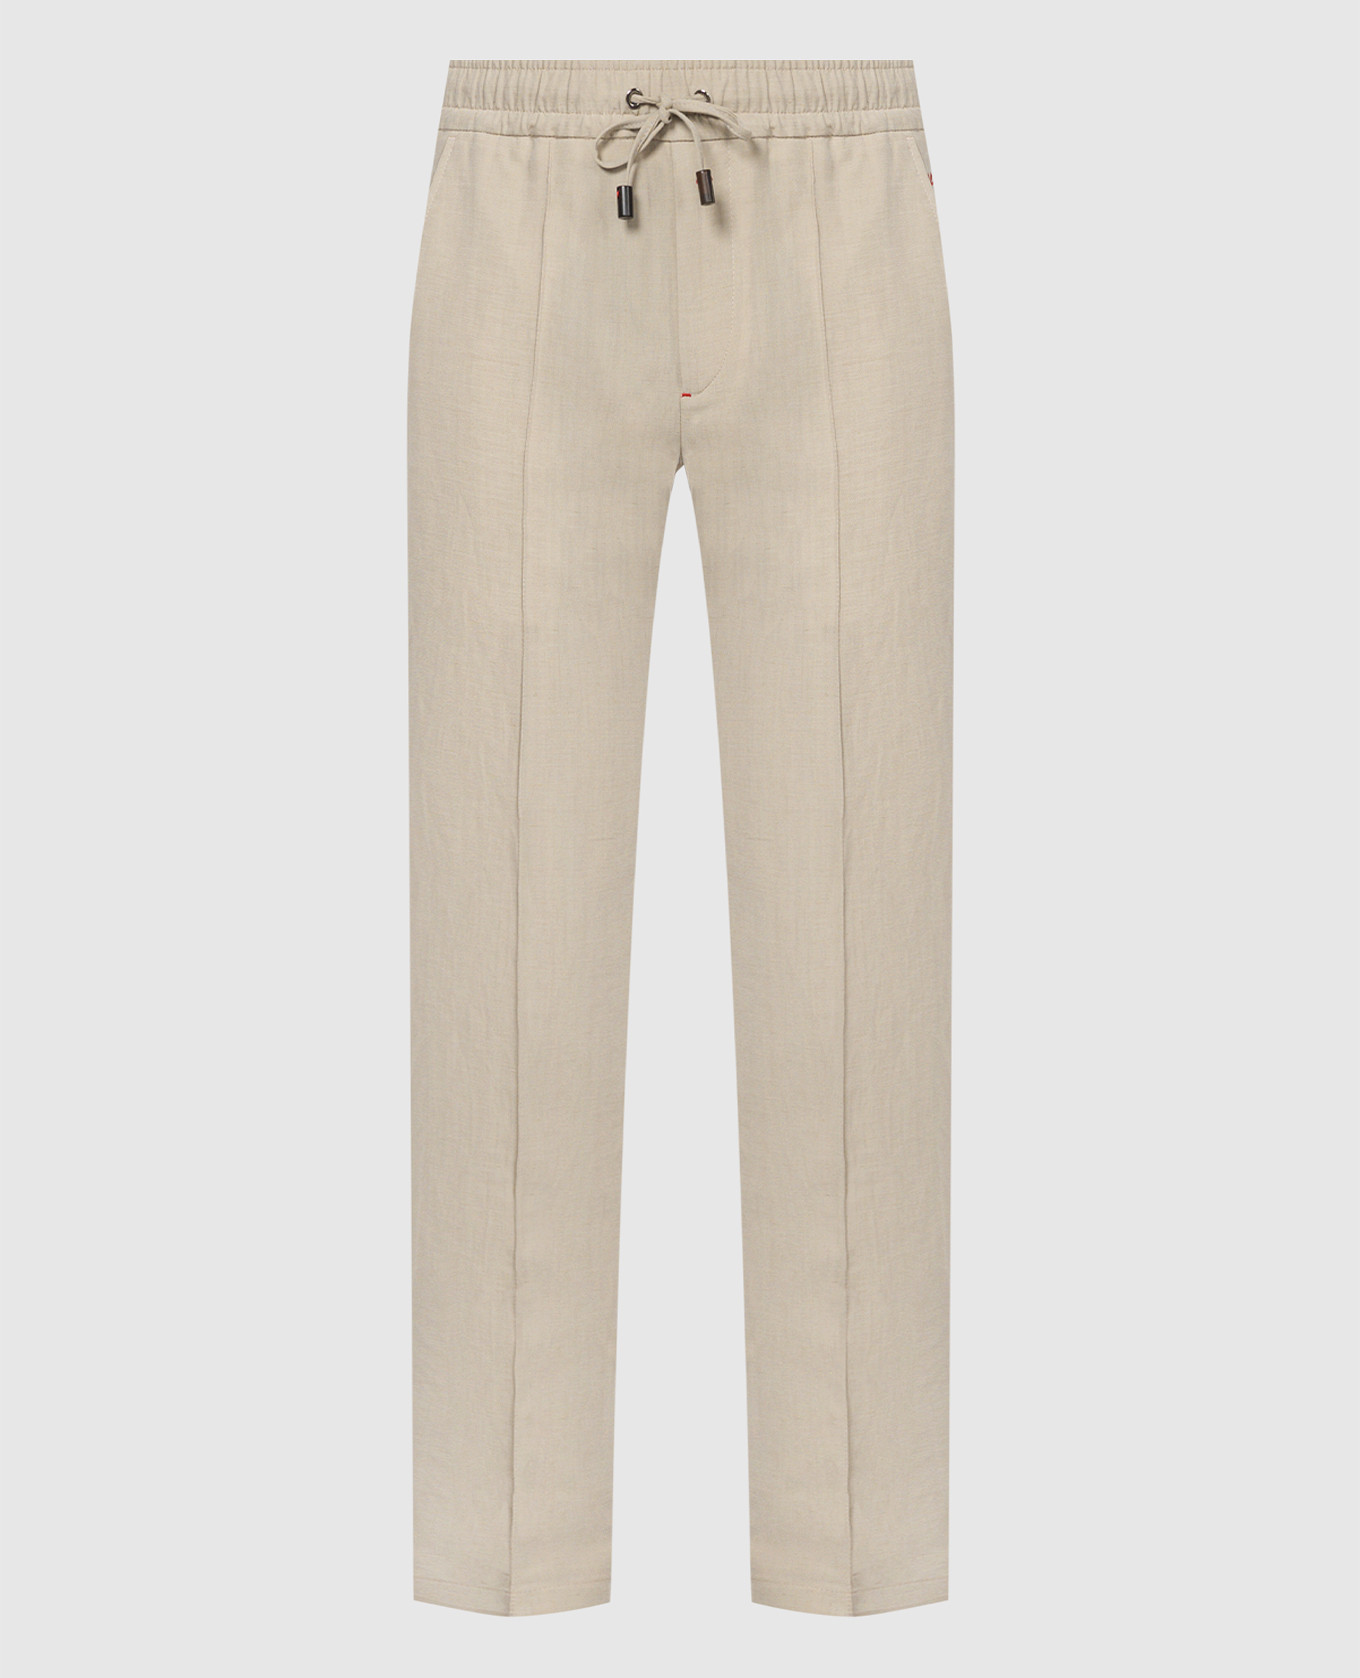 Beige wool and linen trousers with embroidered logo